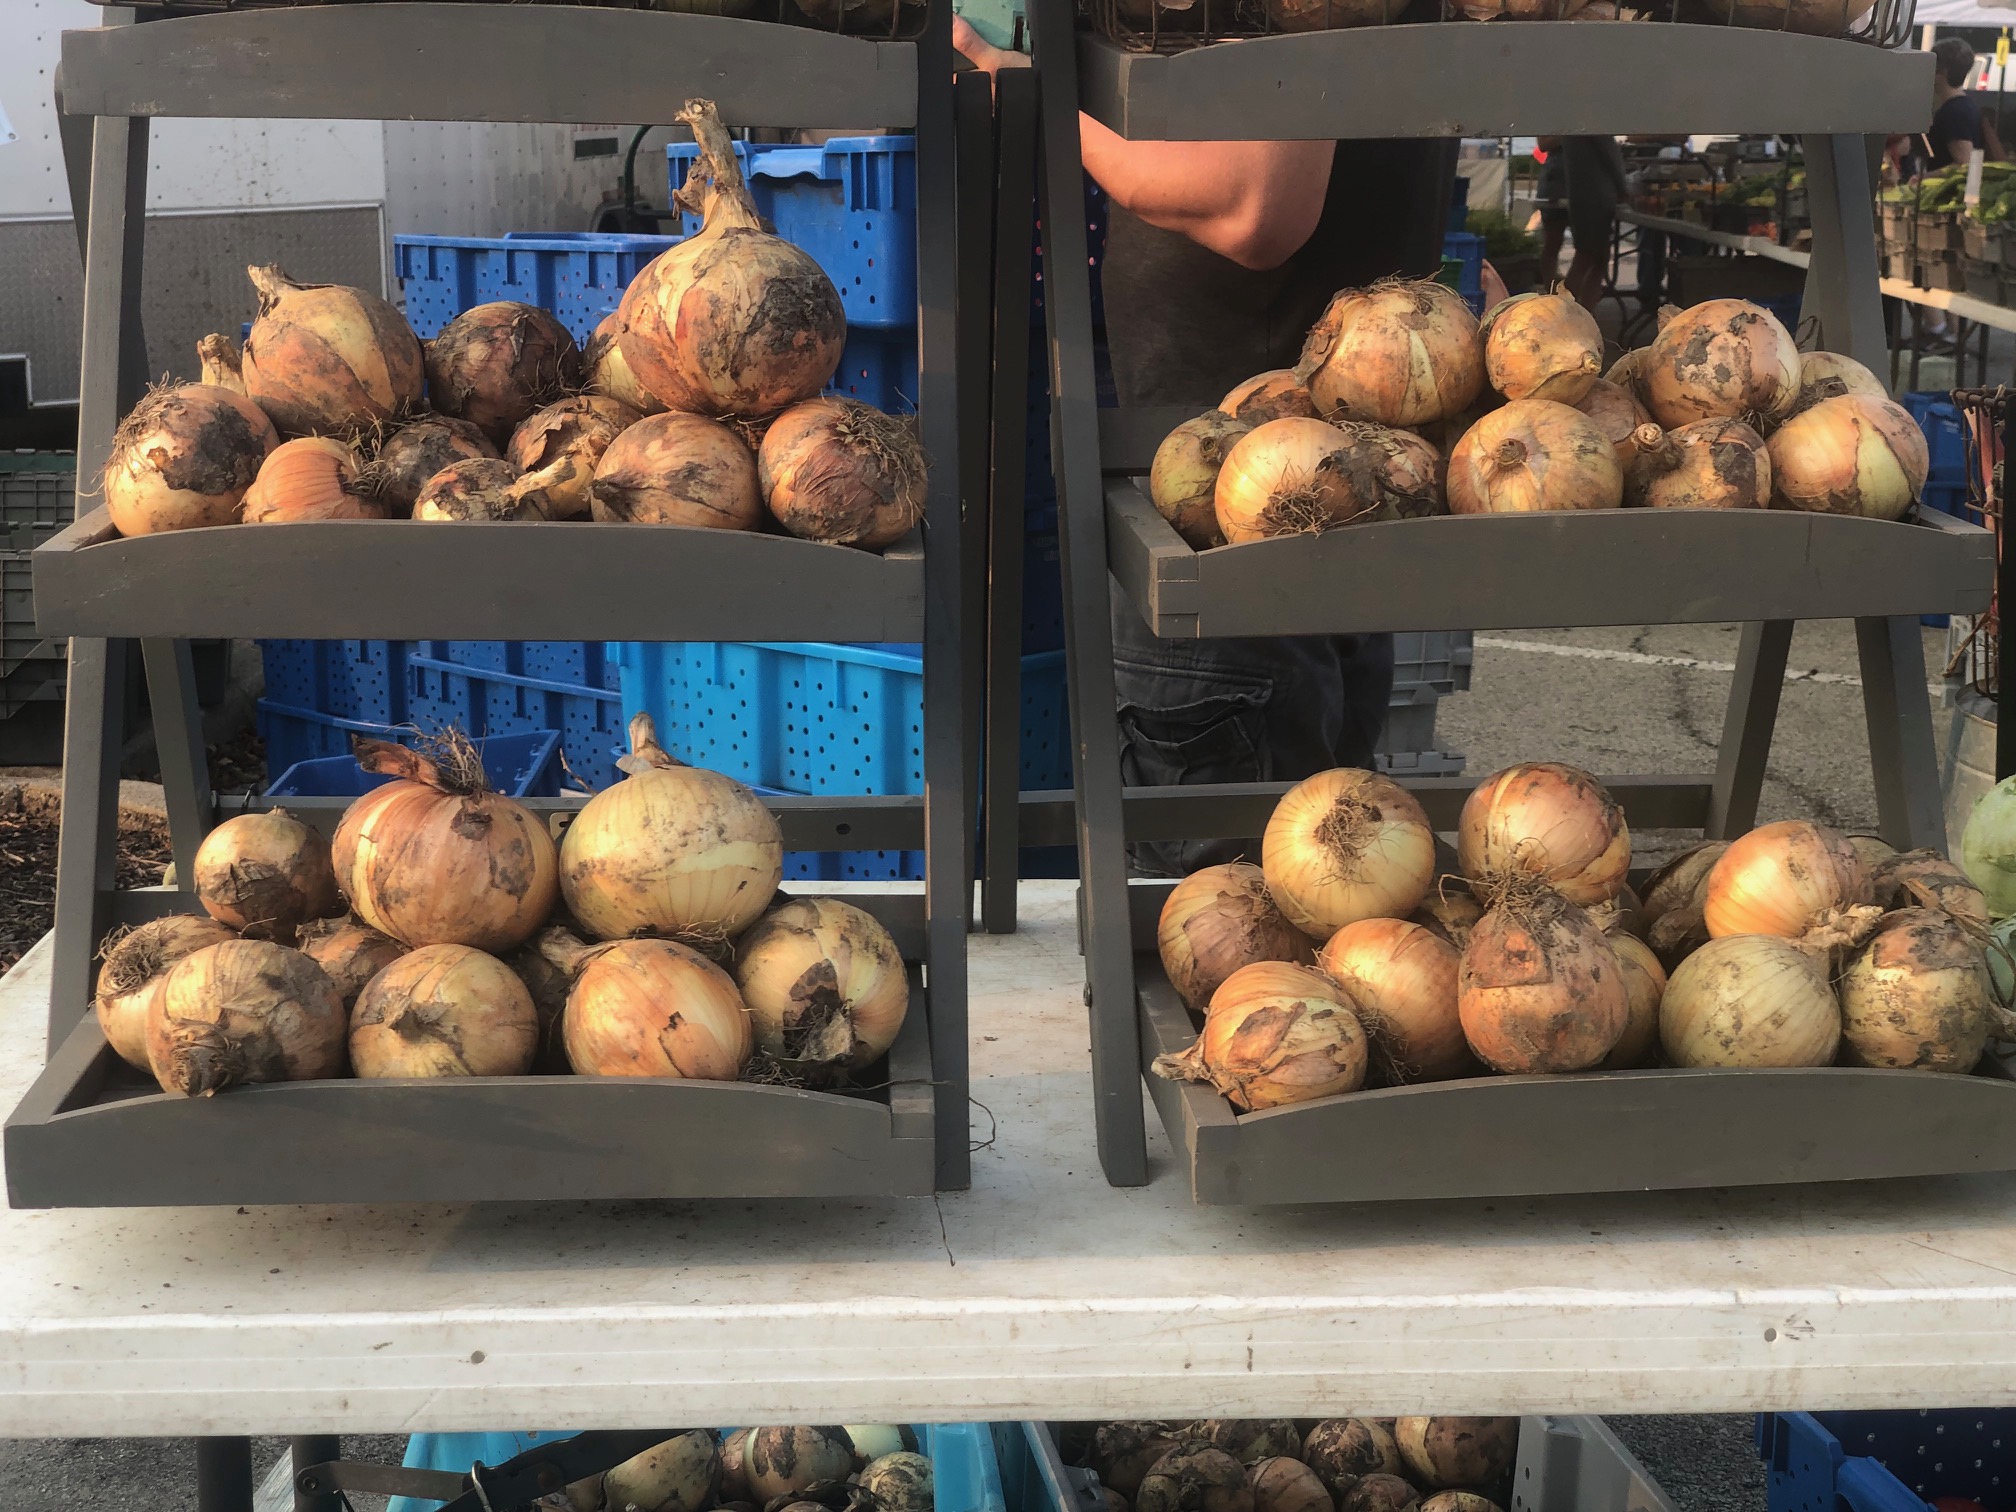 On a white folding table, there are two tiered gray shelves holding onions for sale at the farmers' market. Photo by Alyssa Buckley.